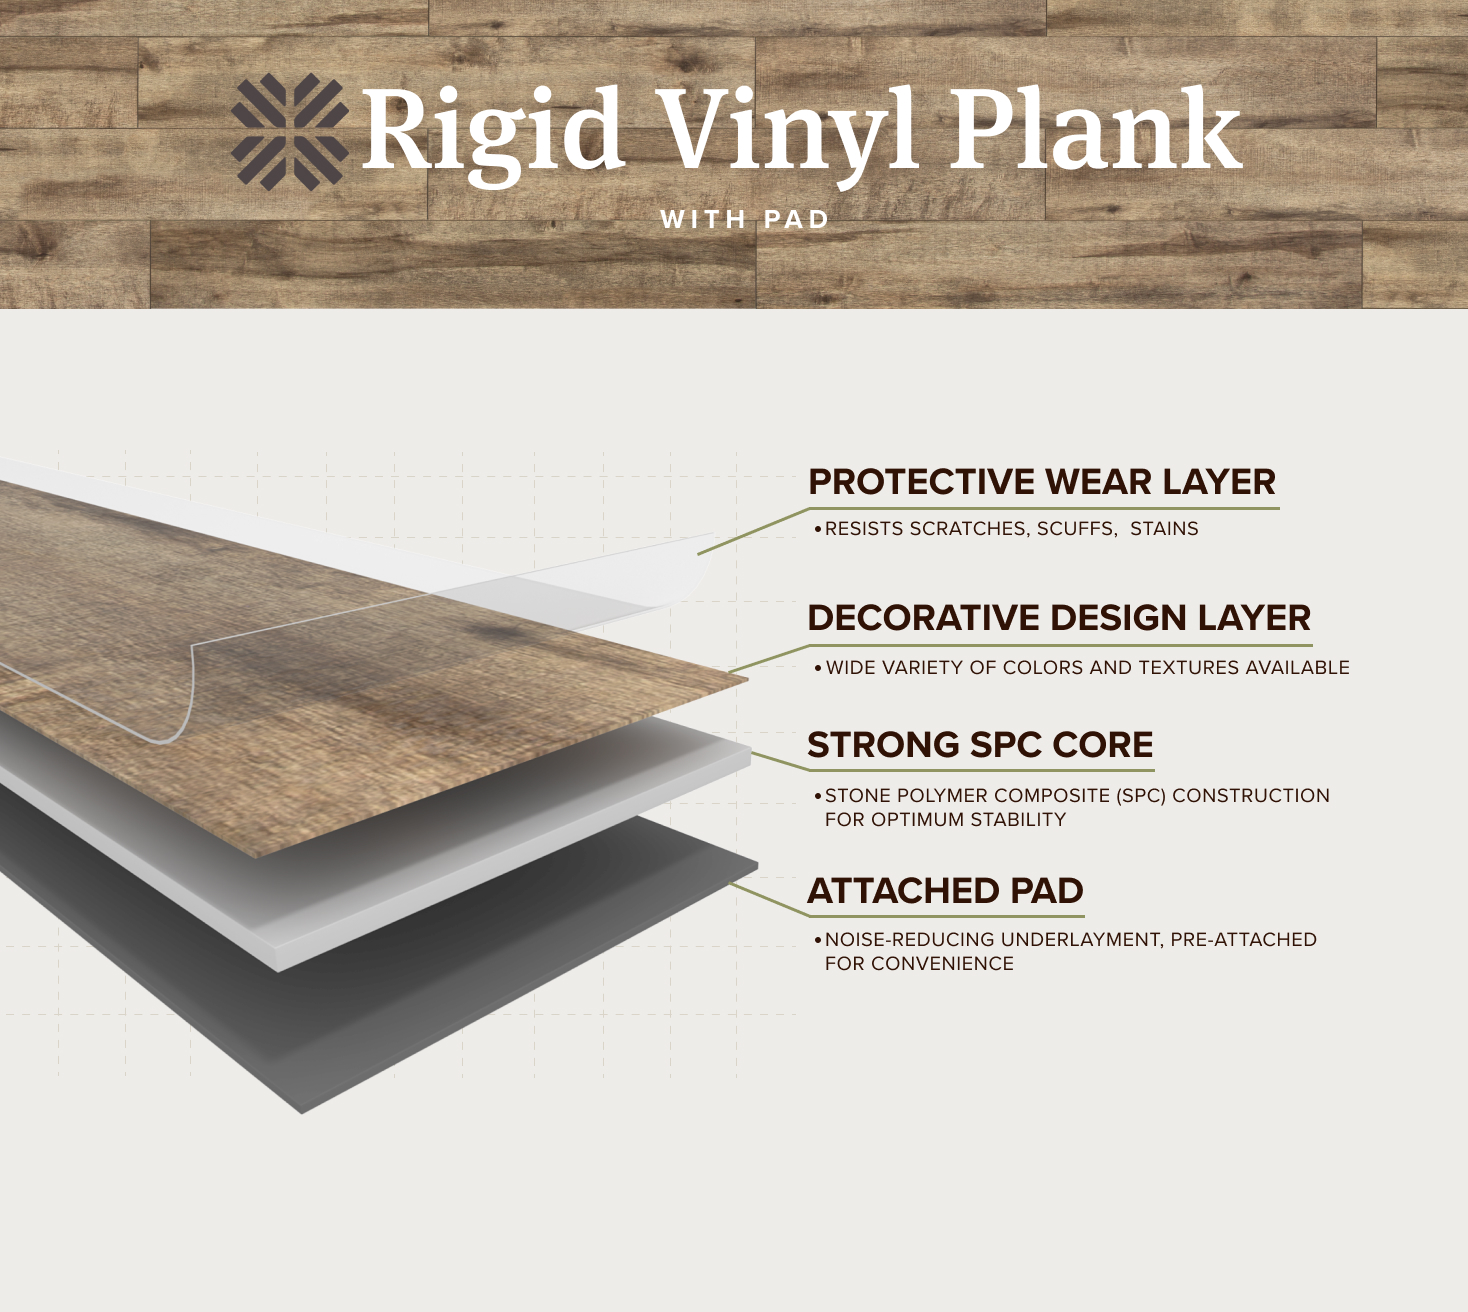 graphic showing layers of rigid vinyl plank rvp including pad, rigid core, decorative layer, wear layer